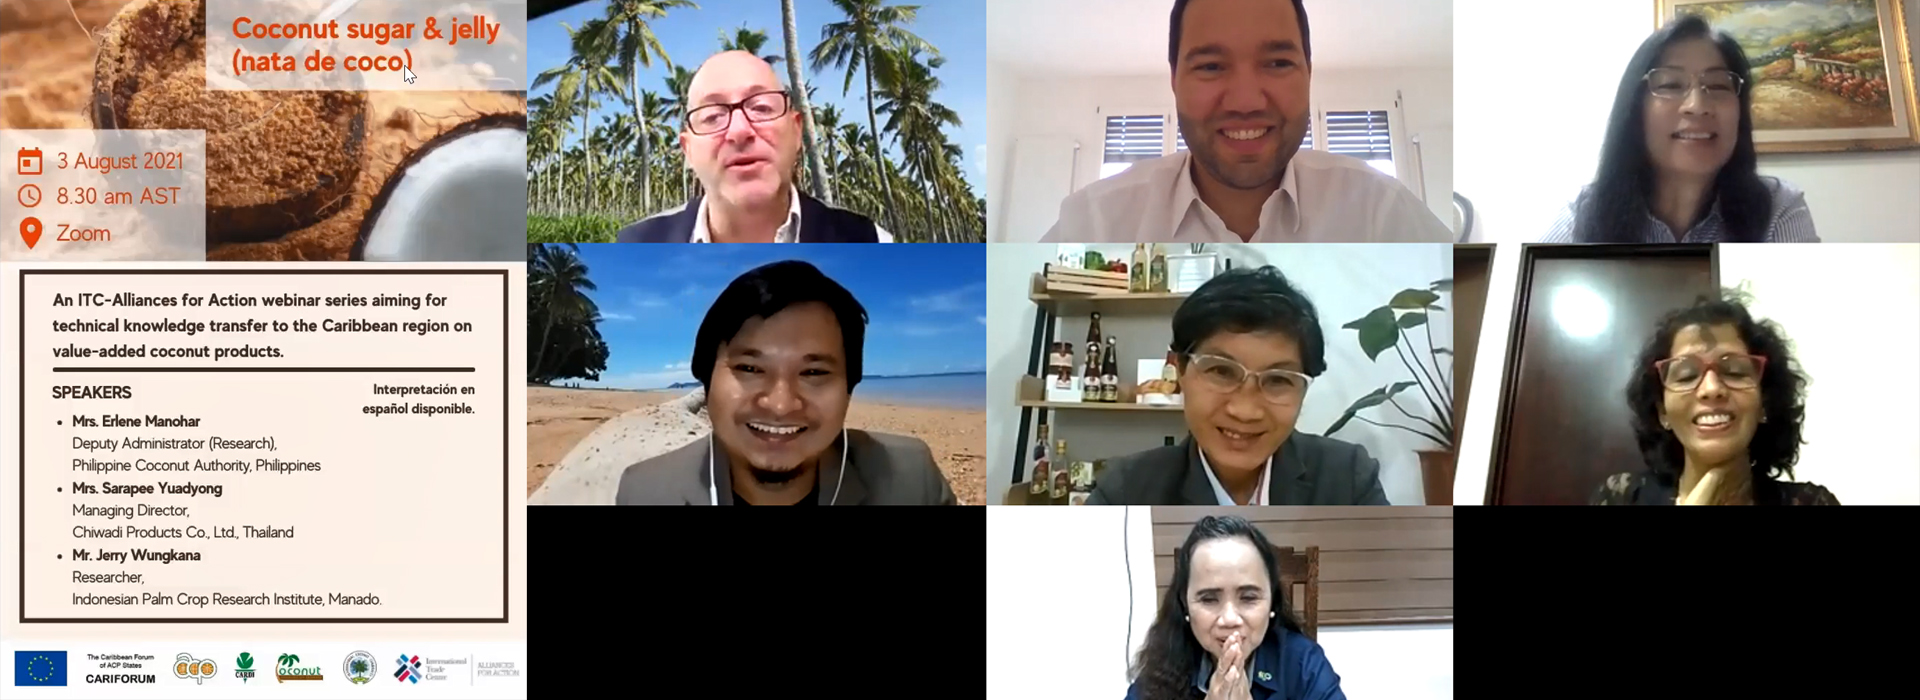 online-training-and-technical-panel-discussion-on-coconut-sugar-nata-de-coco20211103112613.jpg